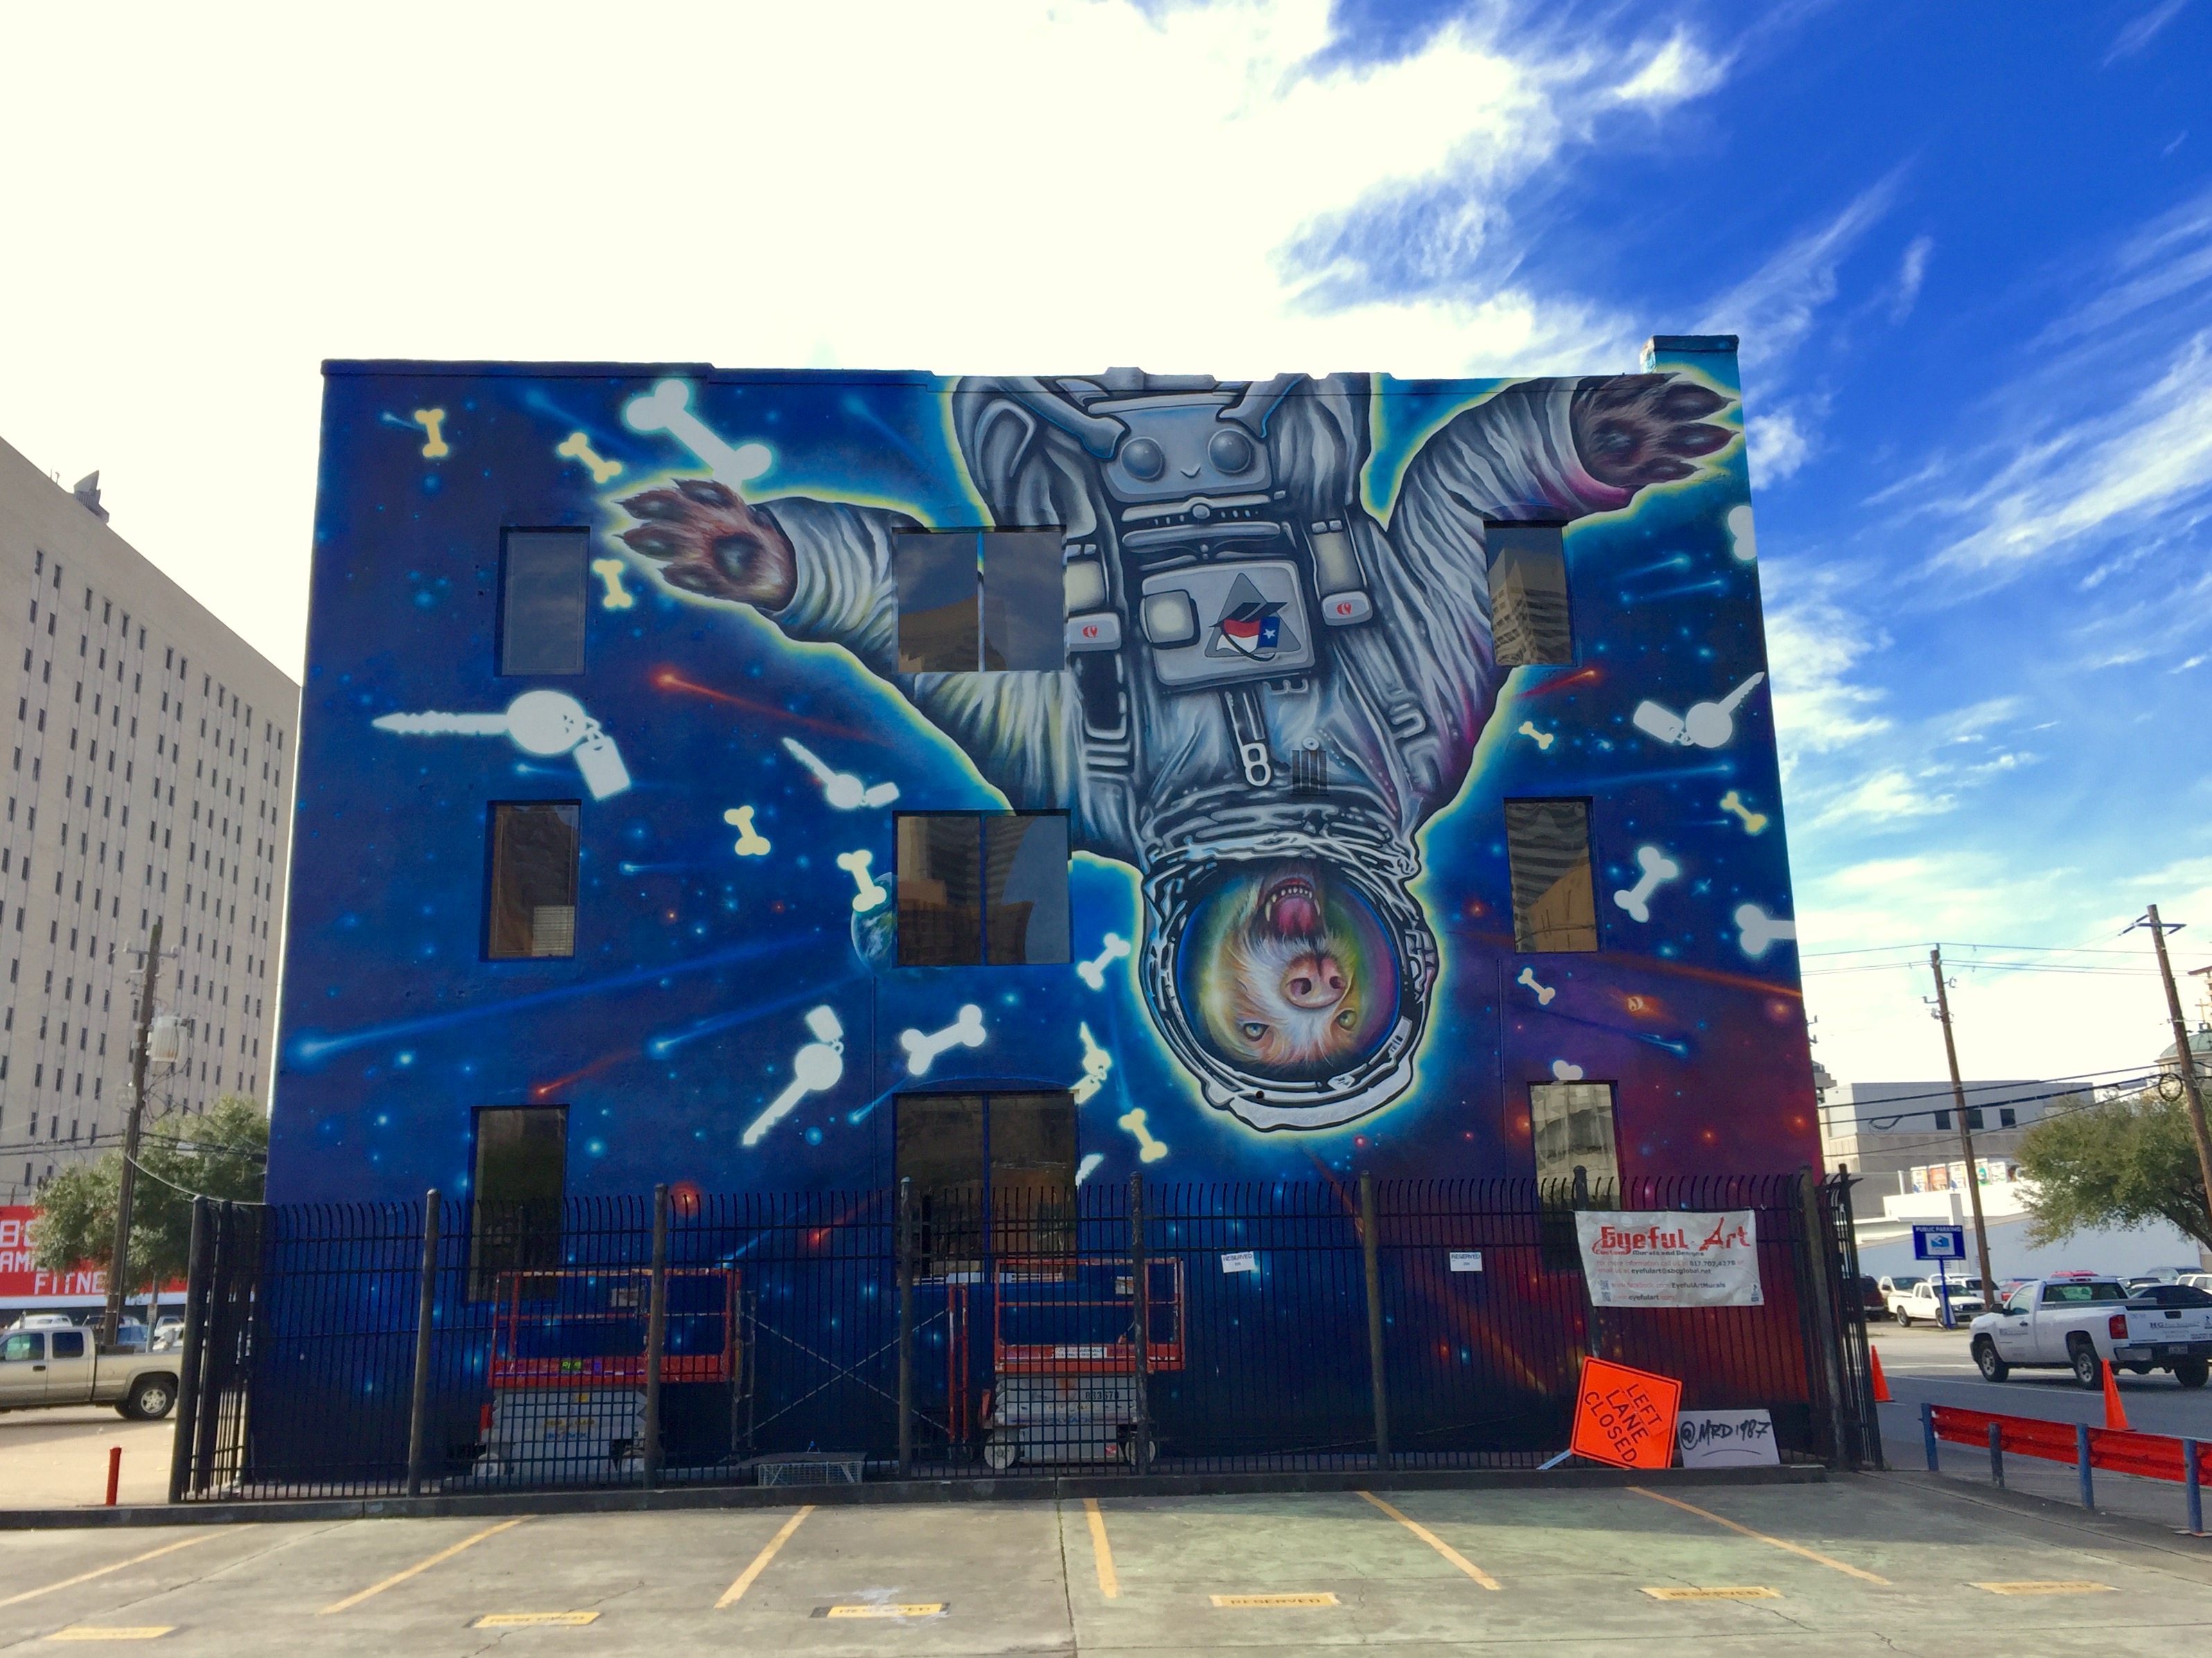 Picture of Space Suite Dog mural on Texas Direct Auto building